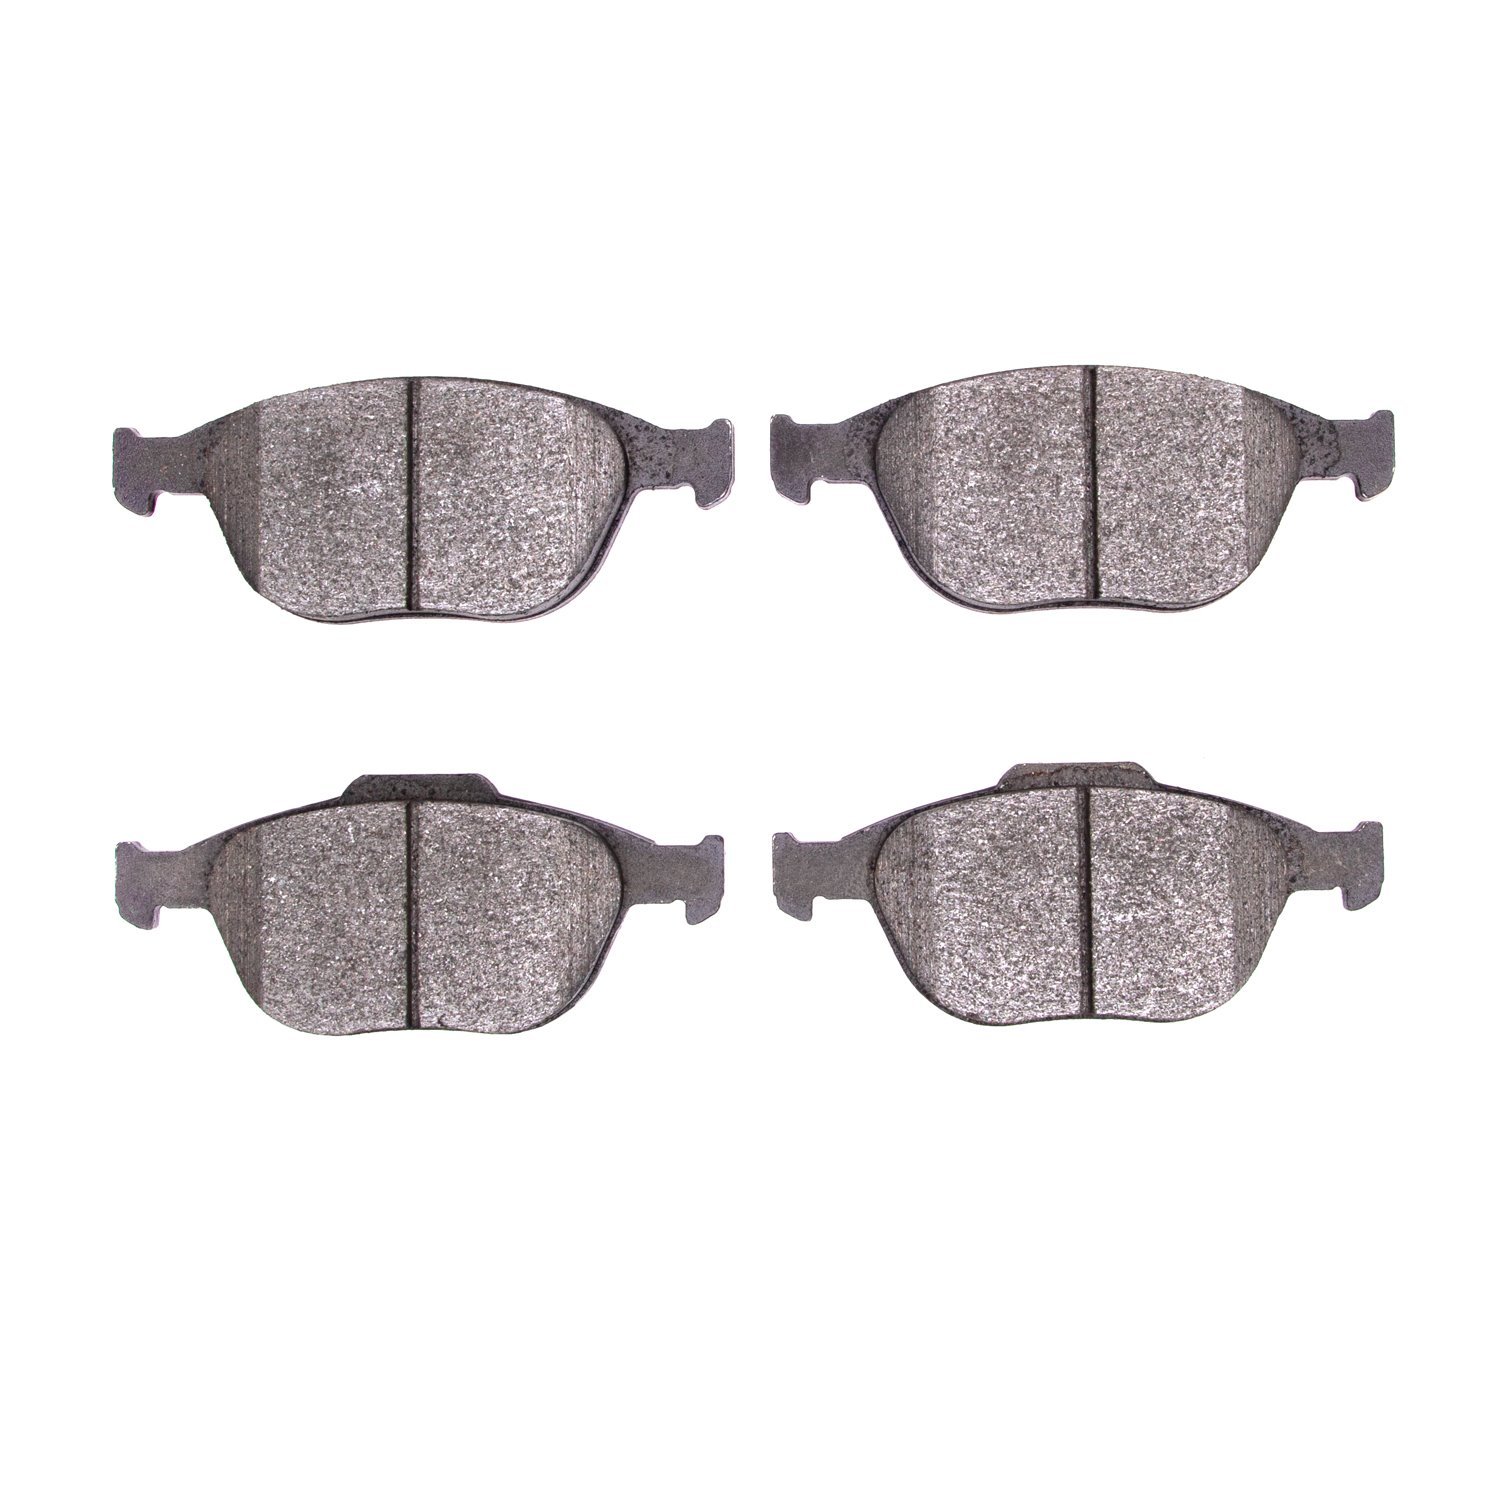 Ceramic Brake Pads, 2002-2013 Ford/Lincoln/Mercury/Mazda, Position: Front